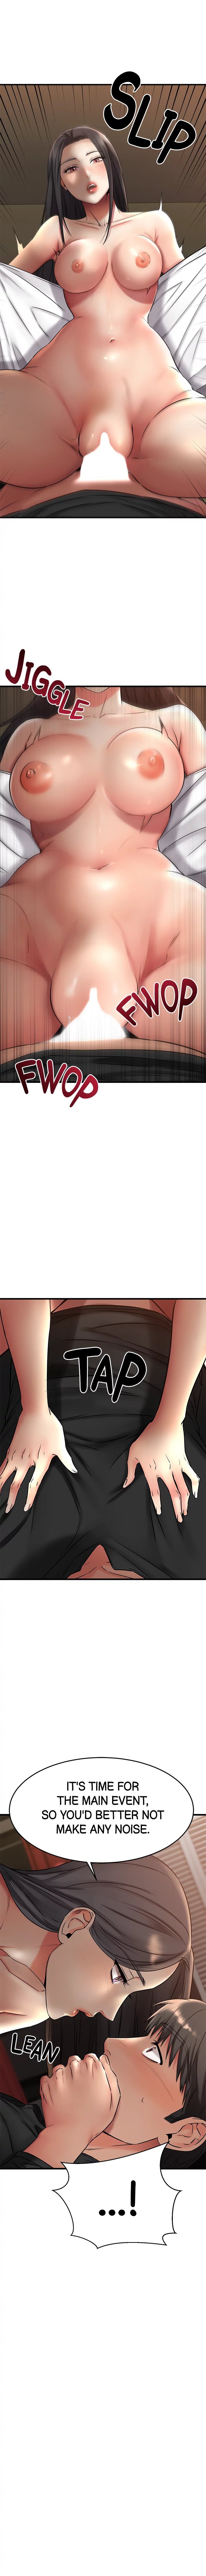 my-female-friend-who-crossed-the-line-chap-36-15